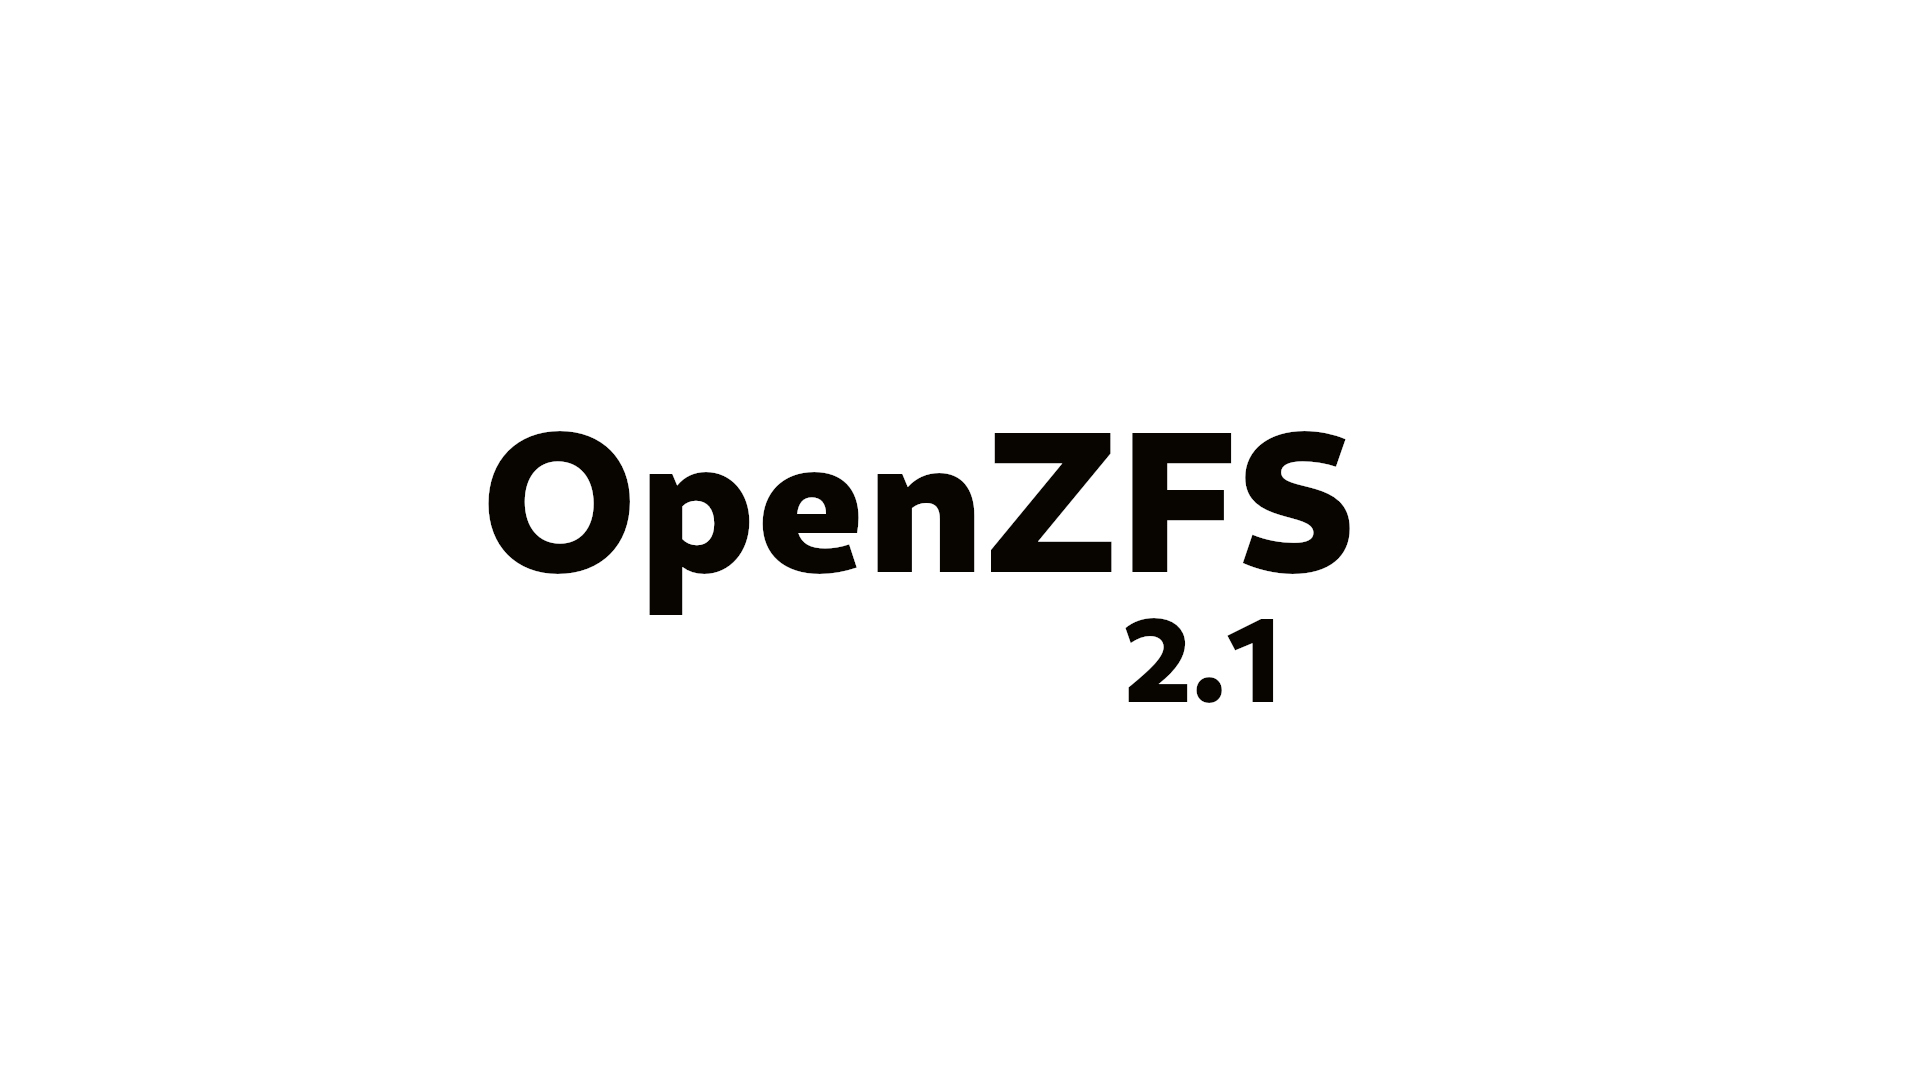 sdfs with openzfs